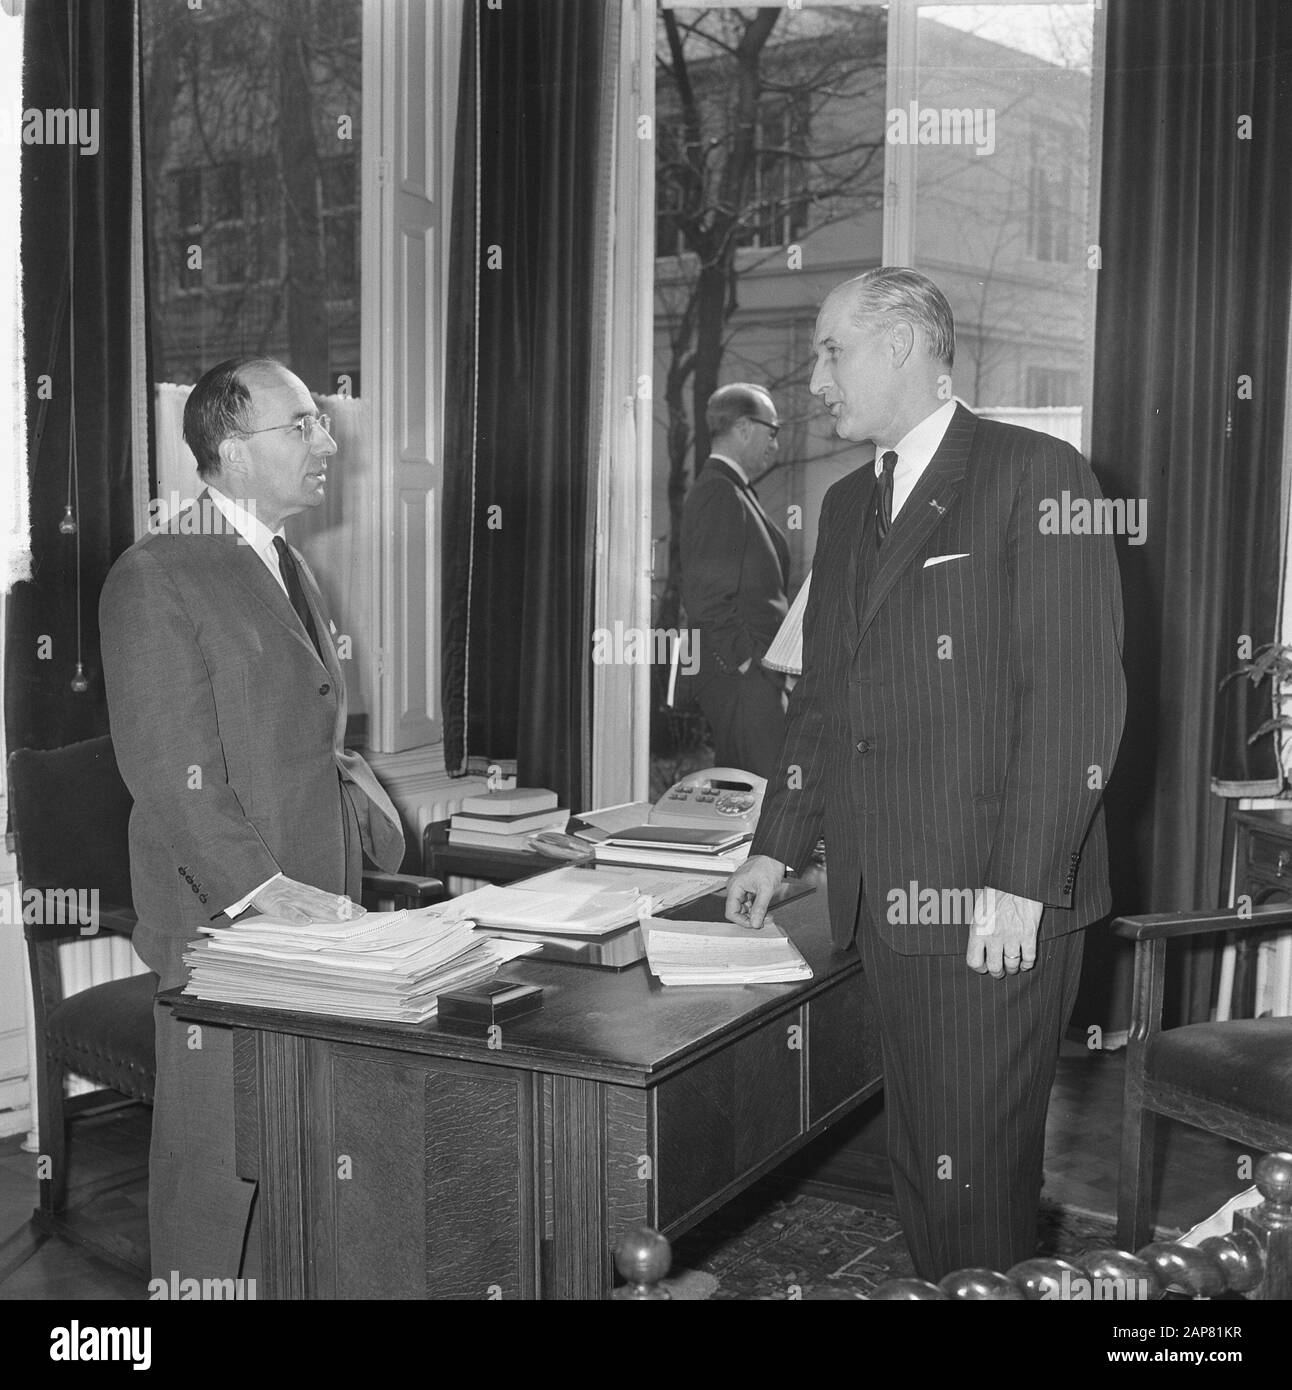 The cabinet crisis, formateur mr. Th. Cals (left) in conversation with Minister Bot of Education, Arts and Sciences Date: 22 March 1965 Location: The Hague, Zuid-Holland Keywords: formateurs, conversations, cabinets, ministers Personal name: Bot Th T, Cals Th Stock Photo